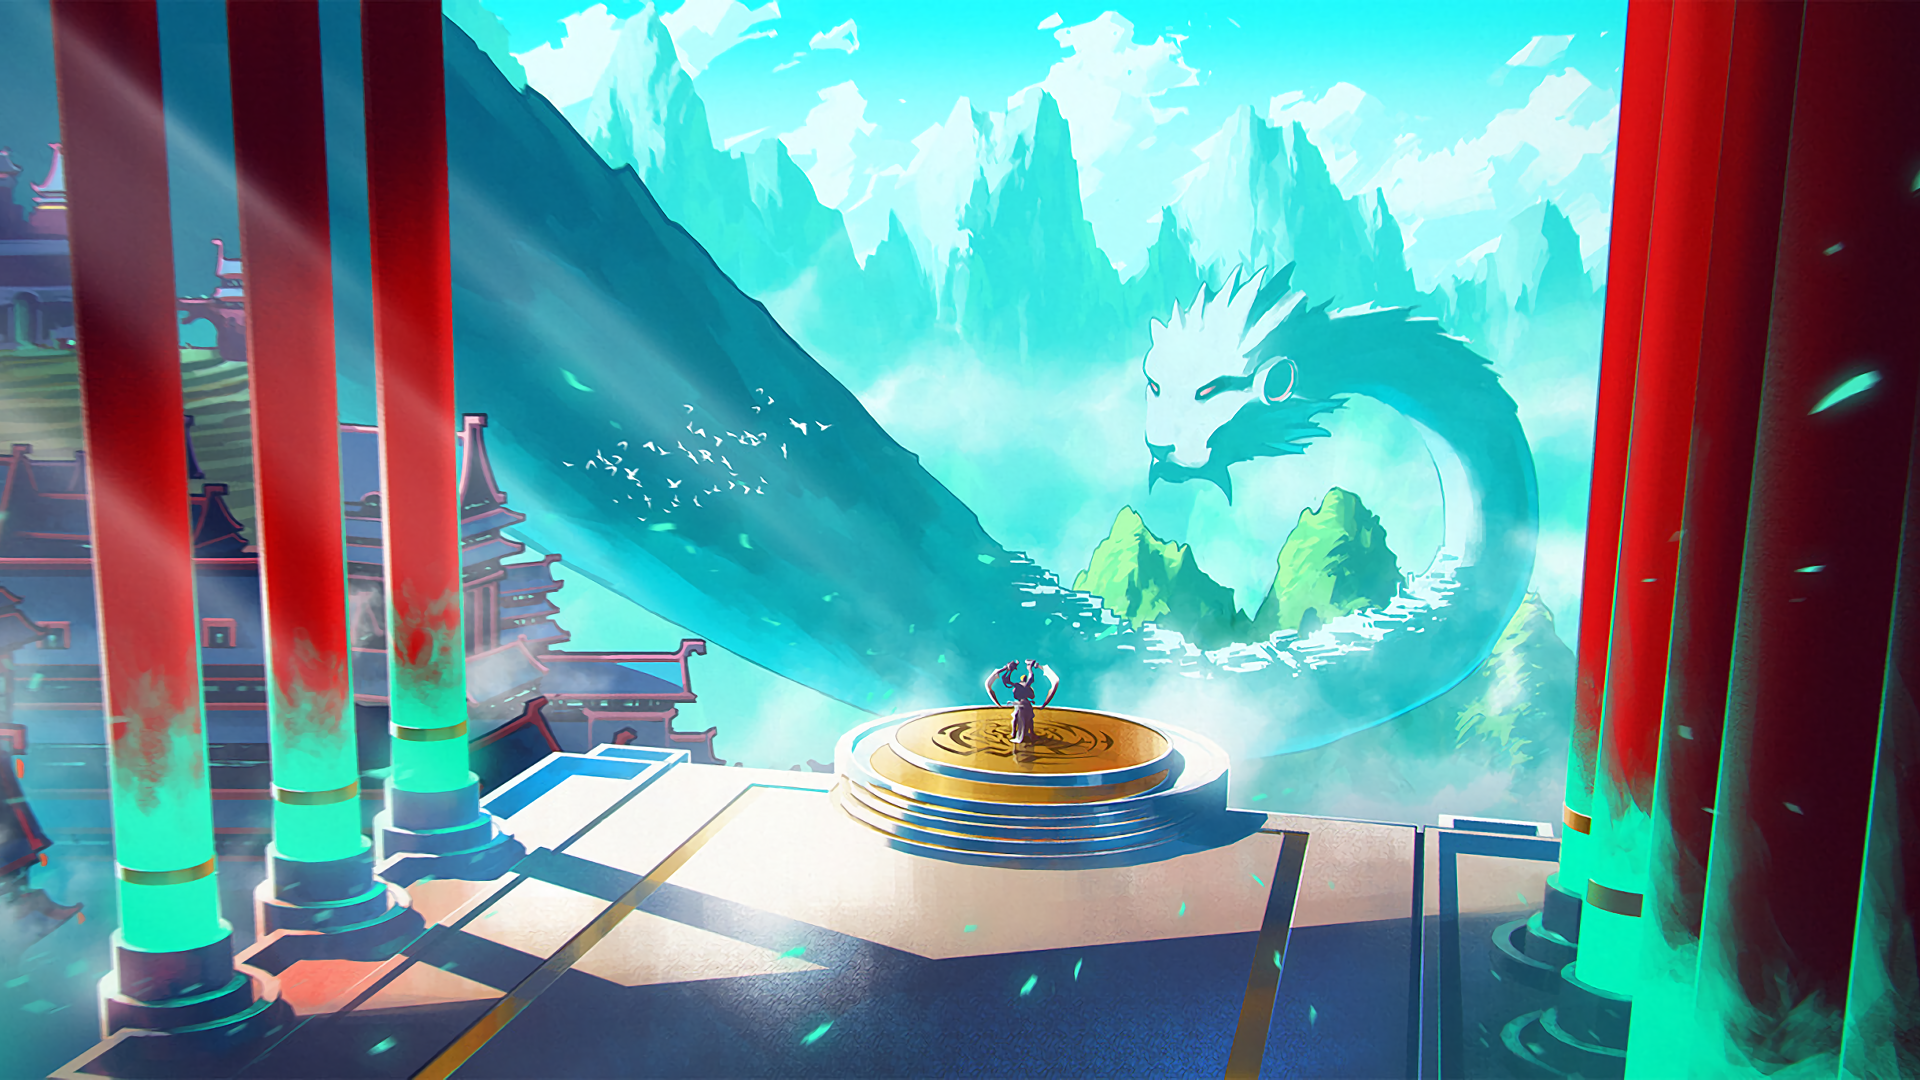 duelyst wallpaper,sky,theatrical scenery,graphics,graphic design,world